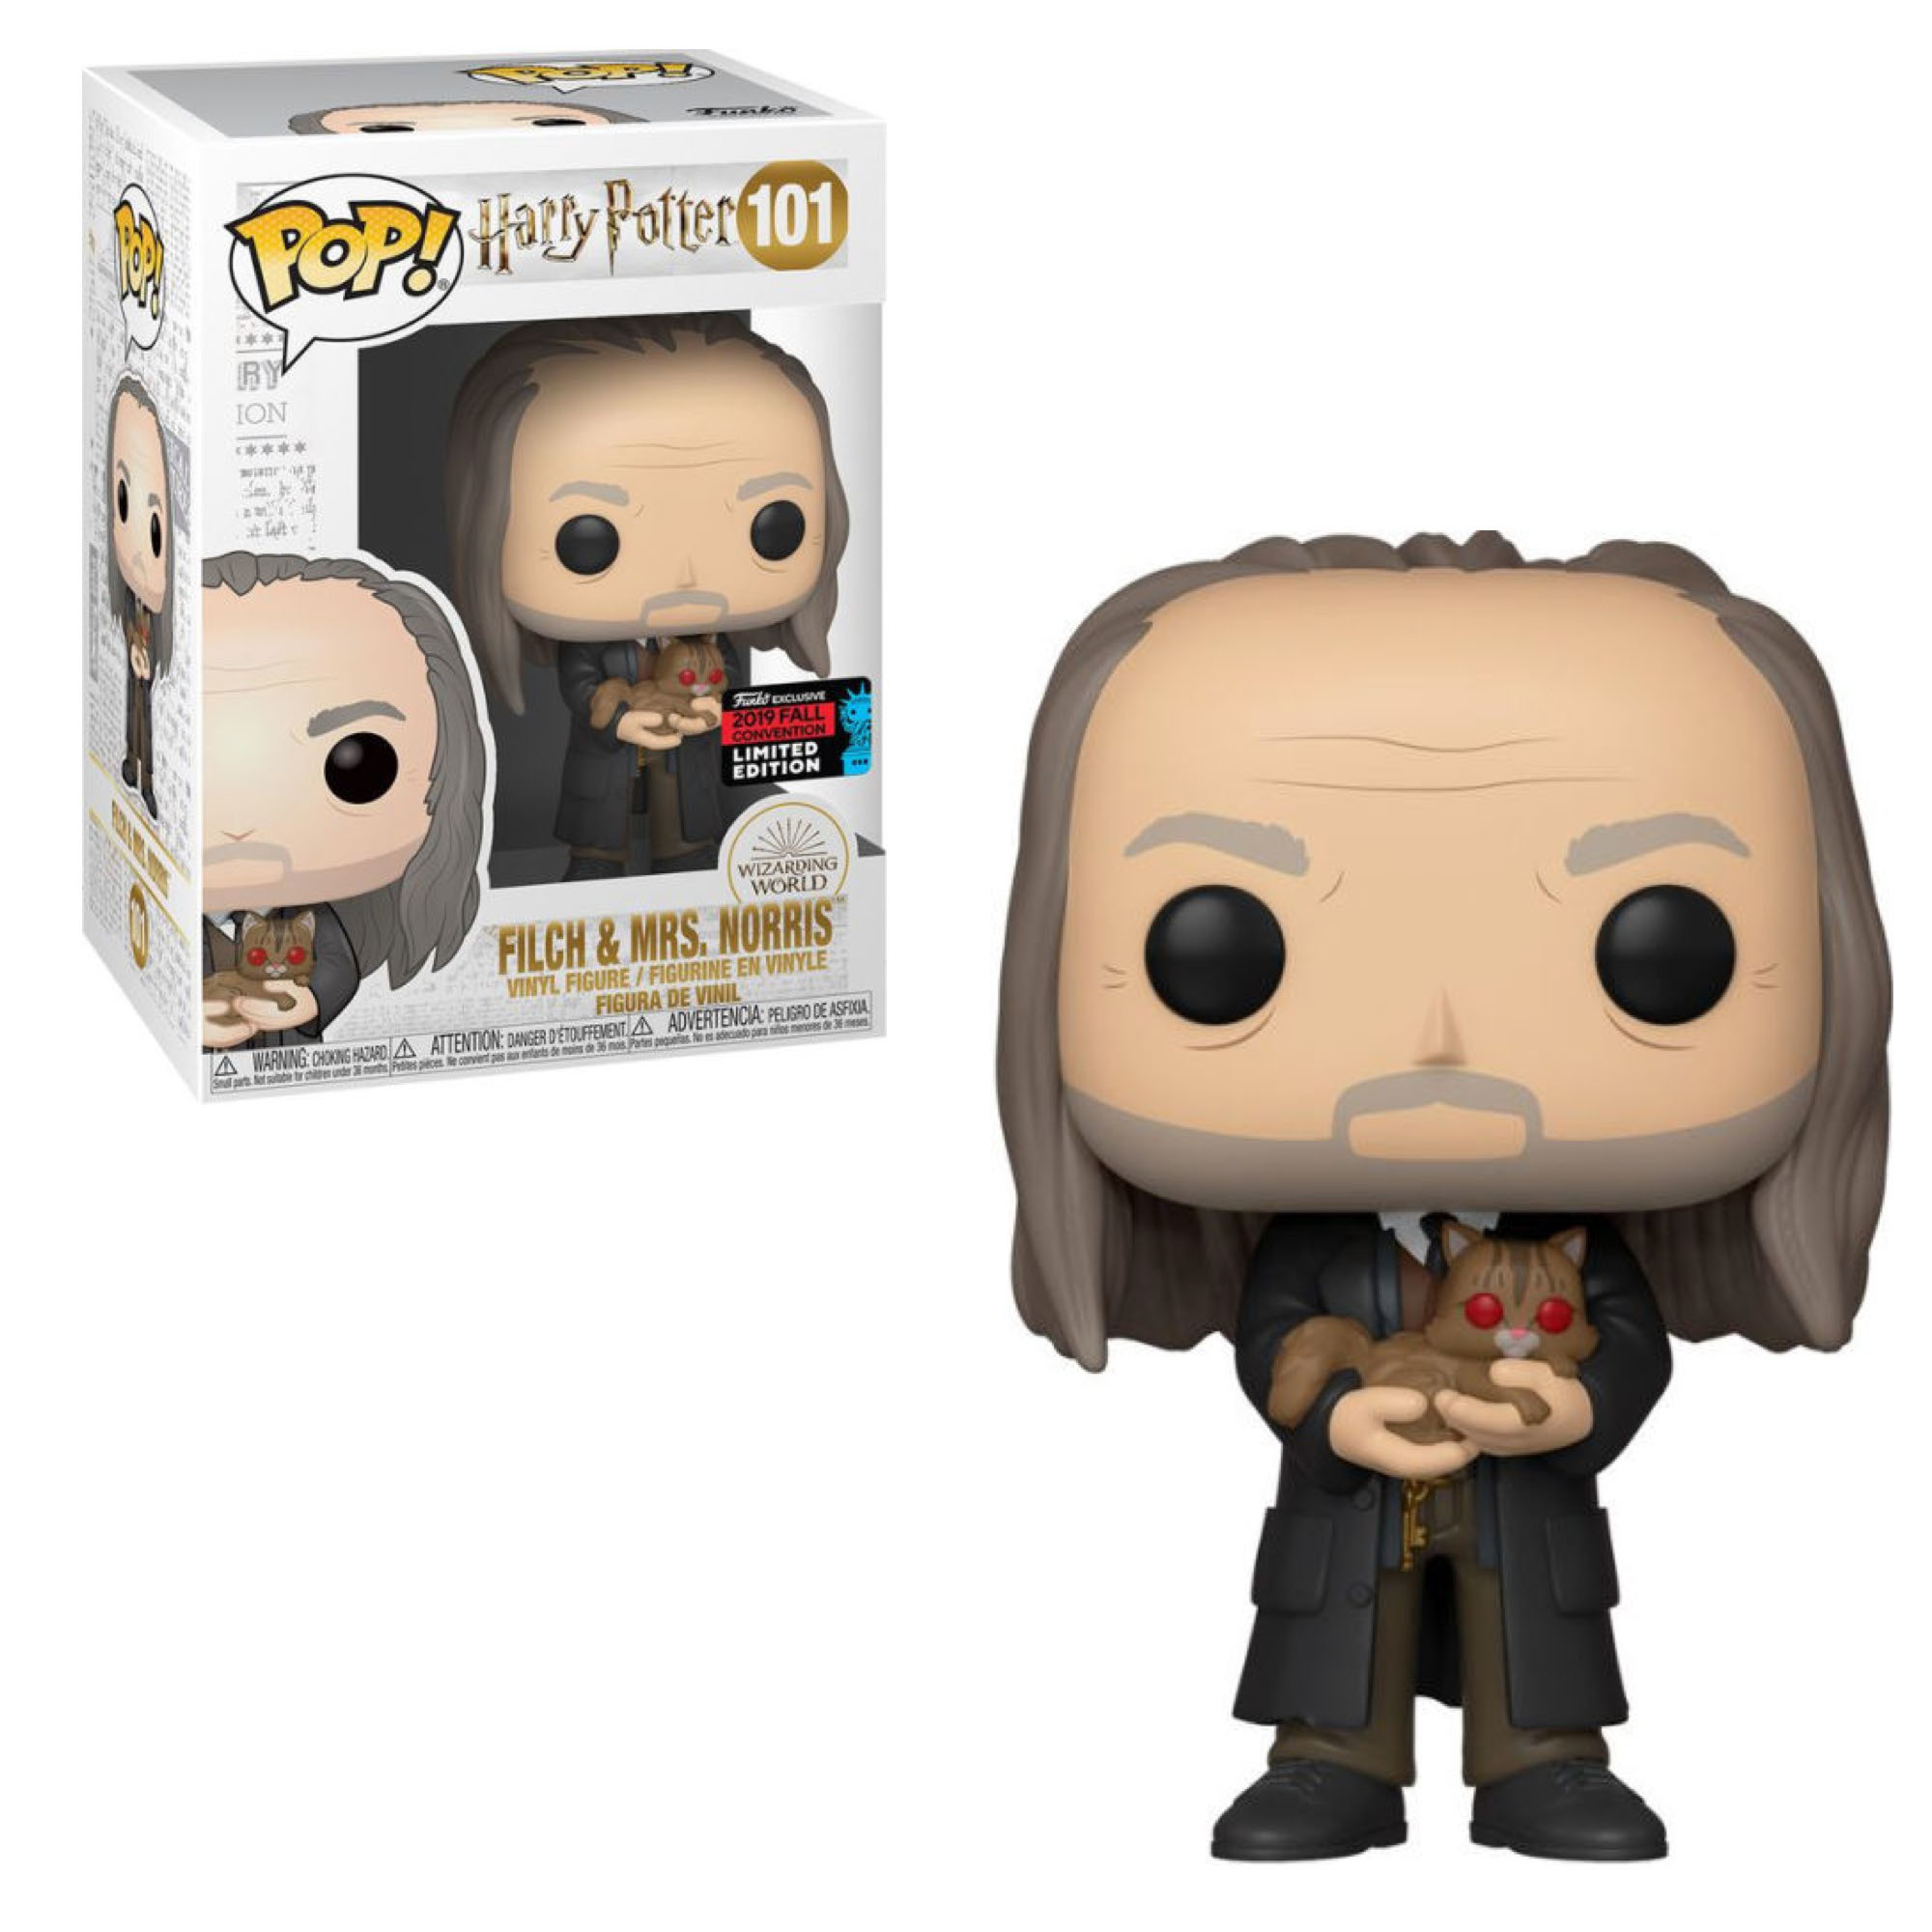 Funko Pop: Movies: Harry Potter: Filch and Mrs. Norris (101) - USED